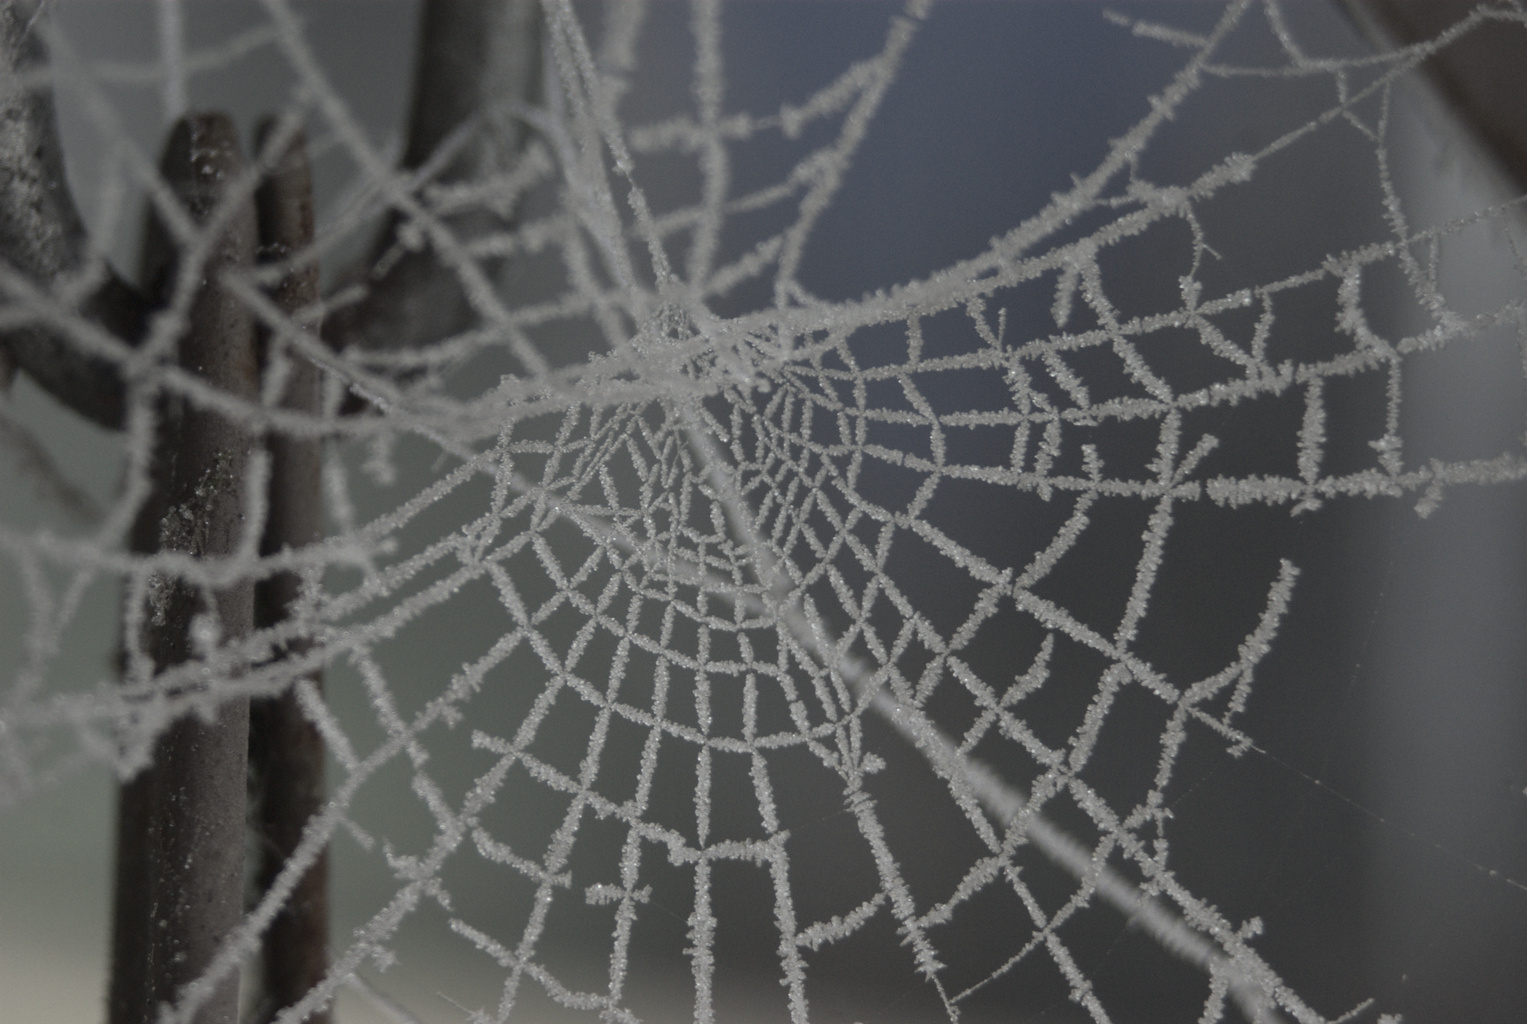 De-saturated image of a frosted spider's web